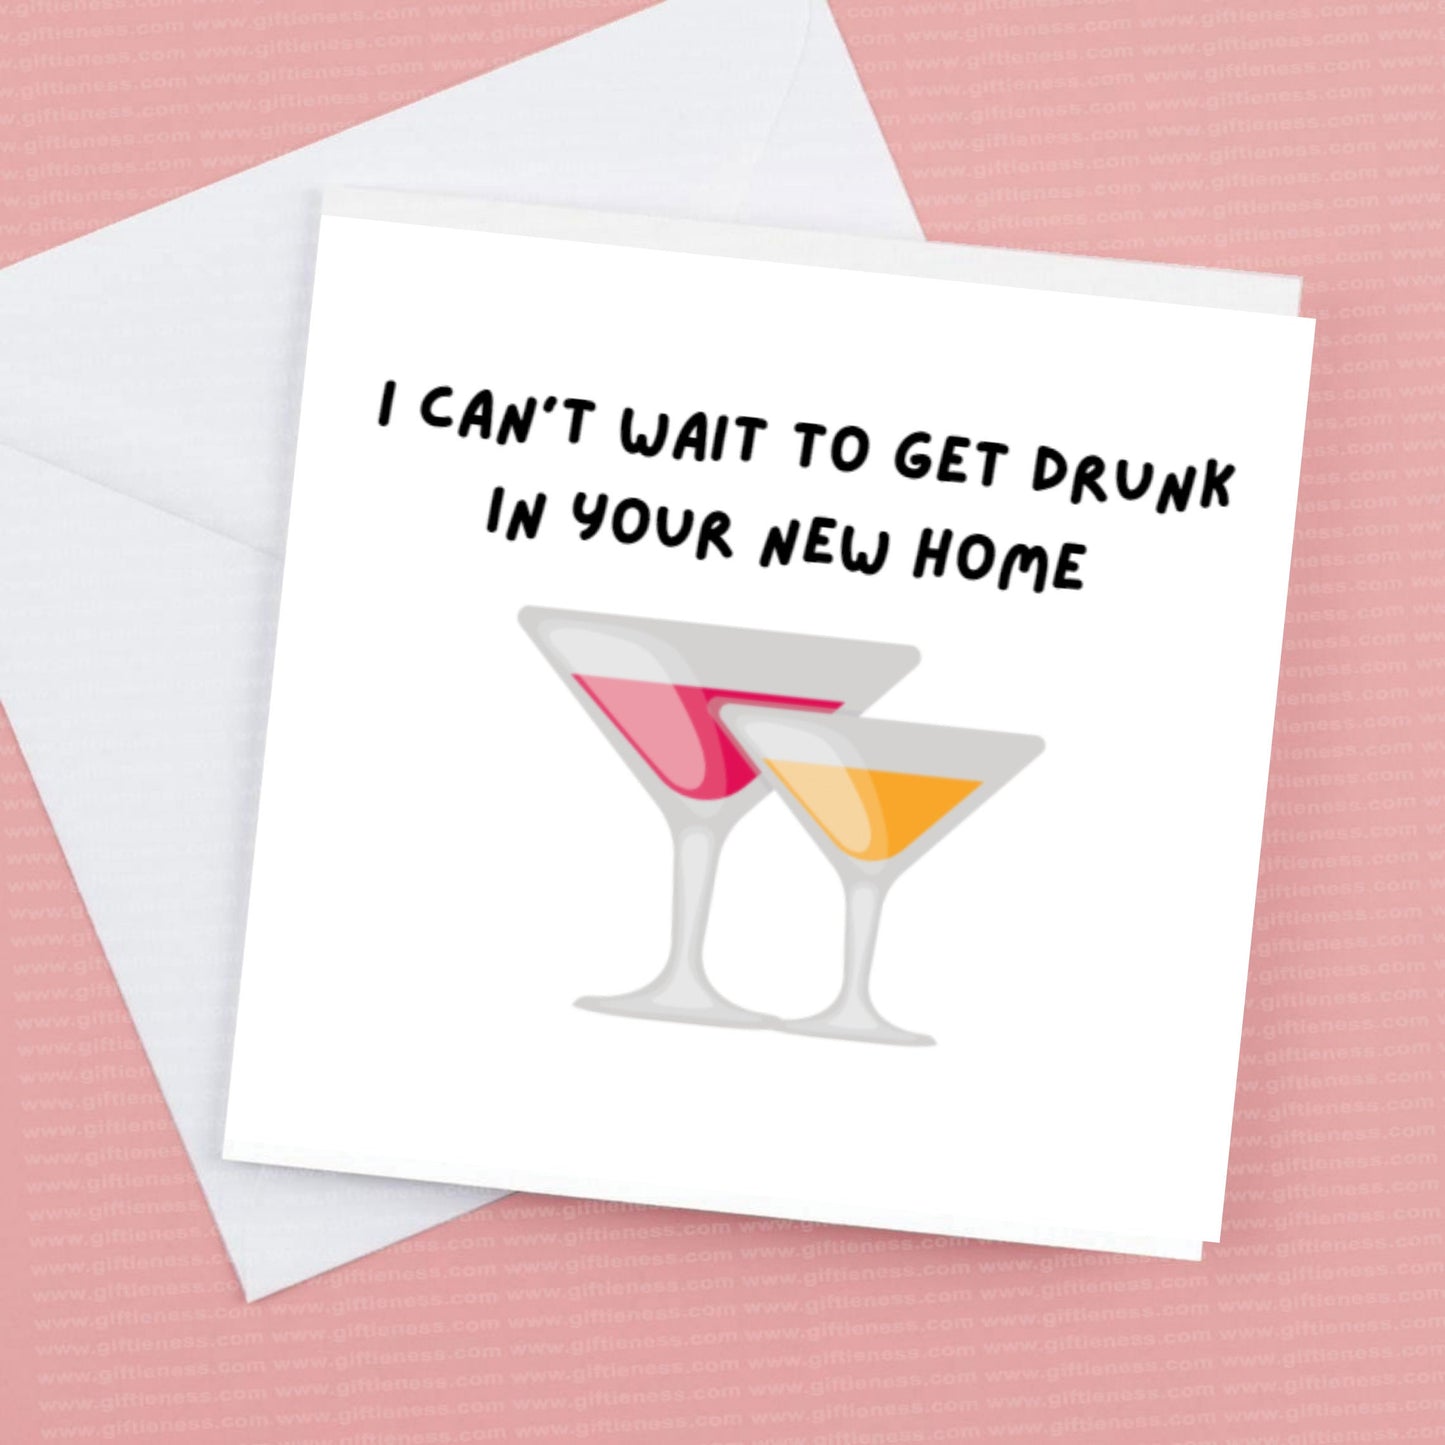 New Home Card - I can't wait to get drunk in your new home